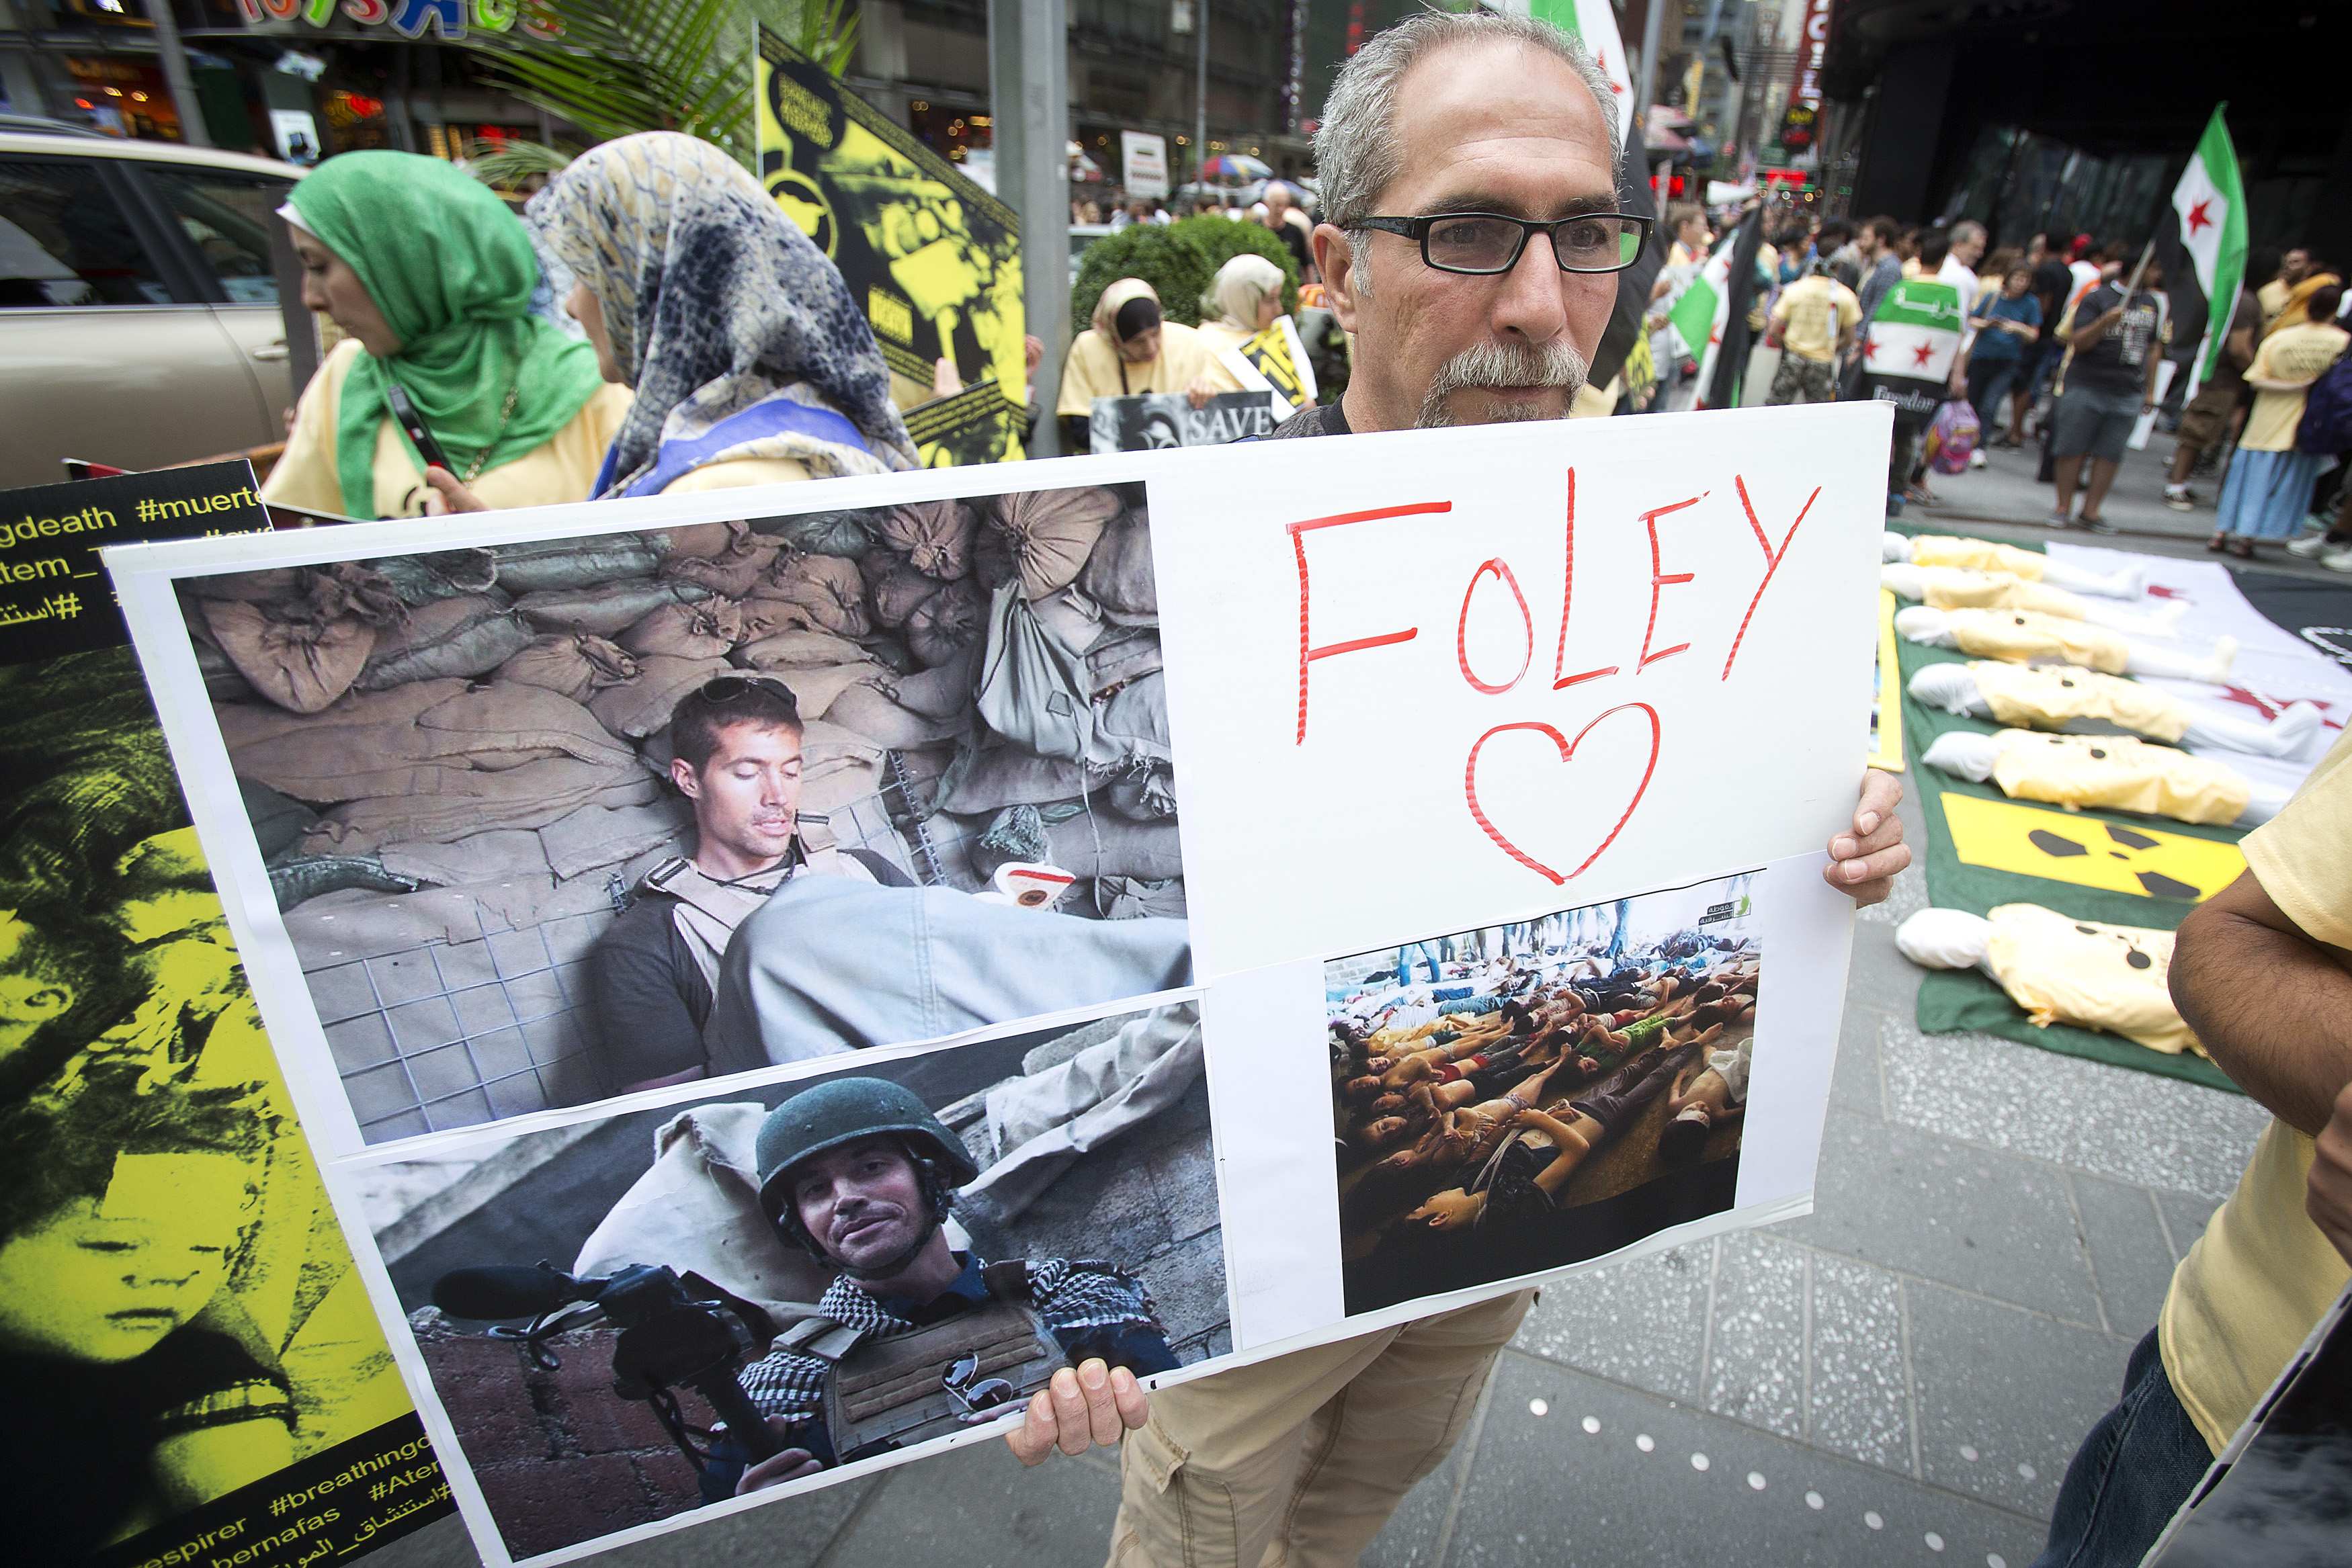 In moving smuggled letter, Foley told of captive life